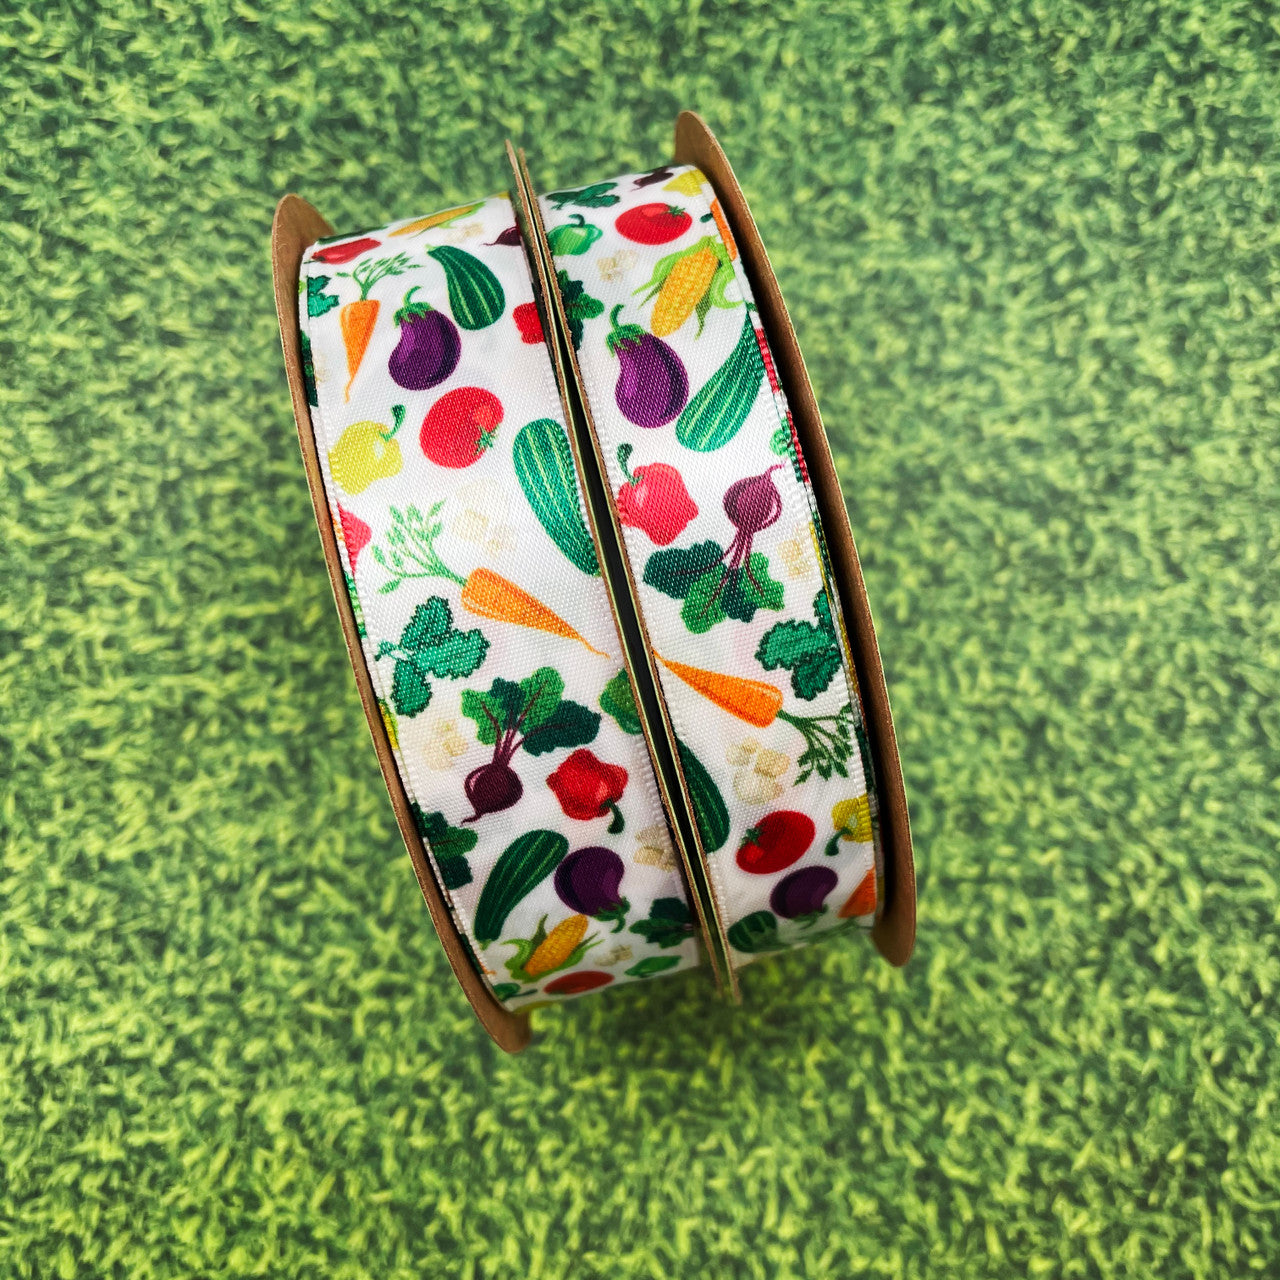 Our veggies ribbon comes in two sizes for all your gift wrap needs!